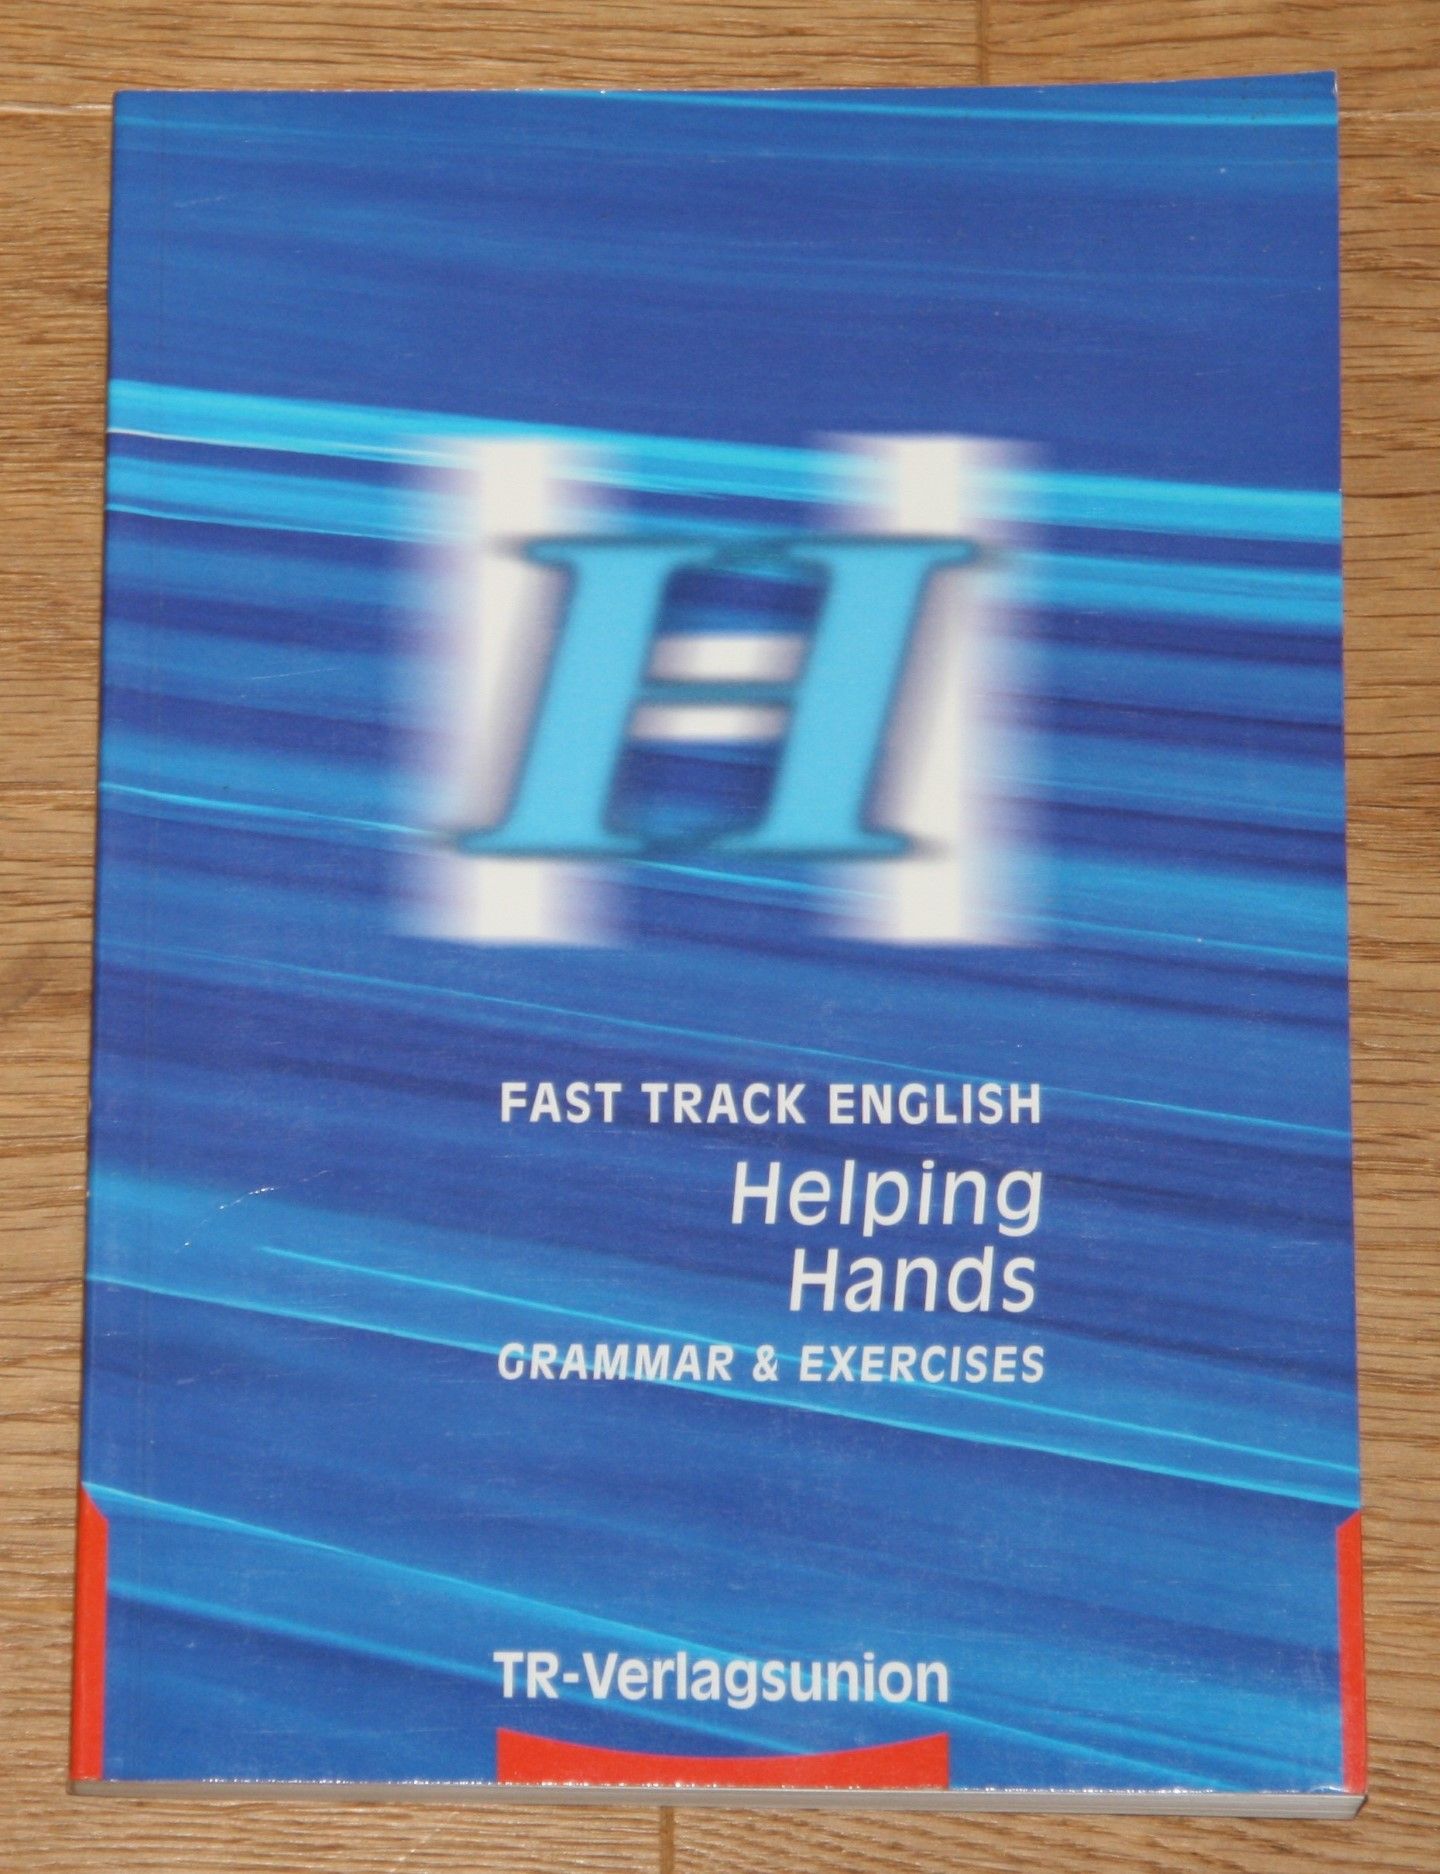 Fast track English - Helping hands: grammar & exercises. - Parr, Robert and Günther Albrecht